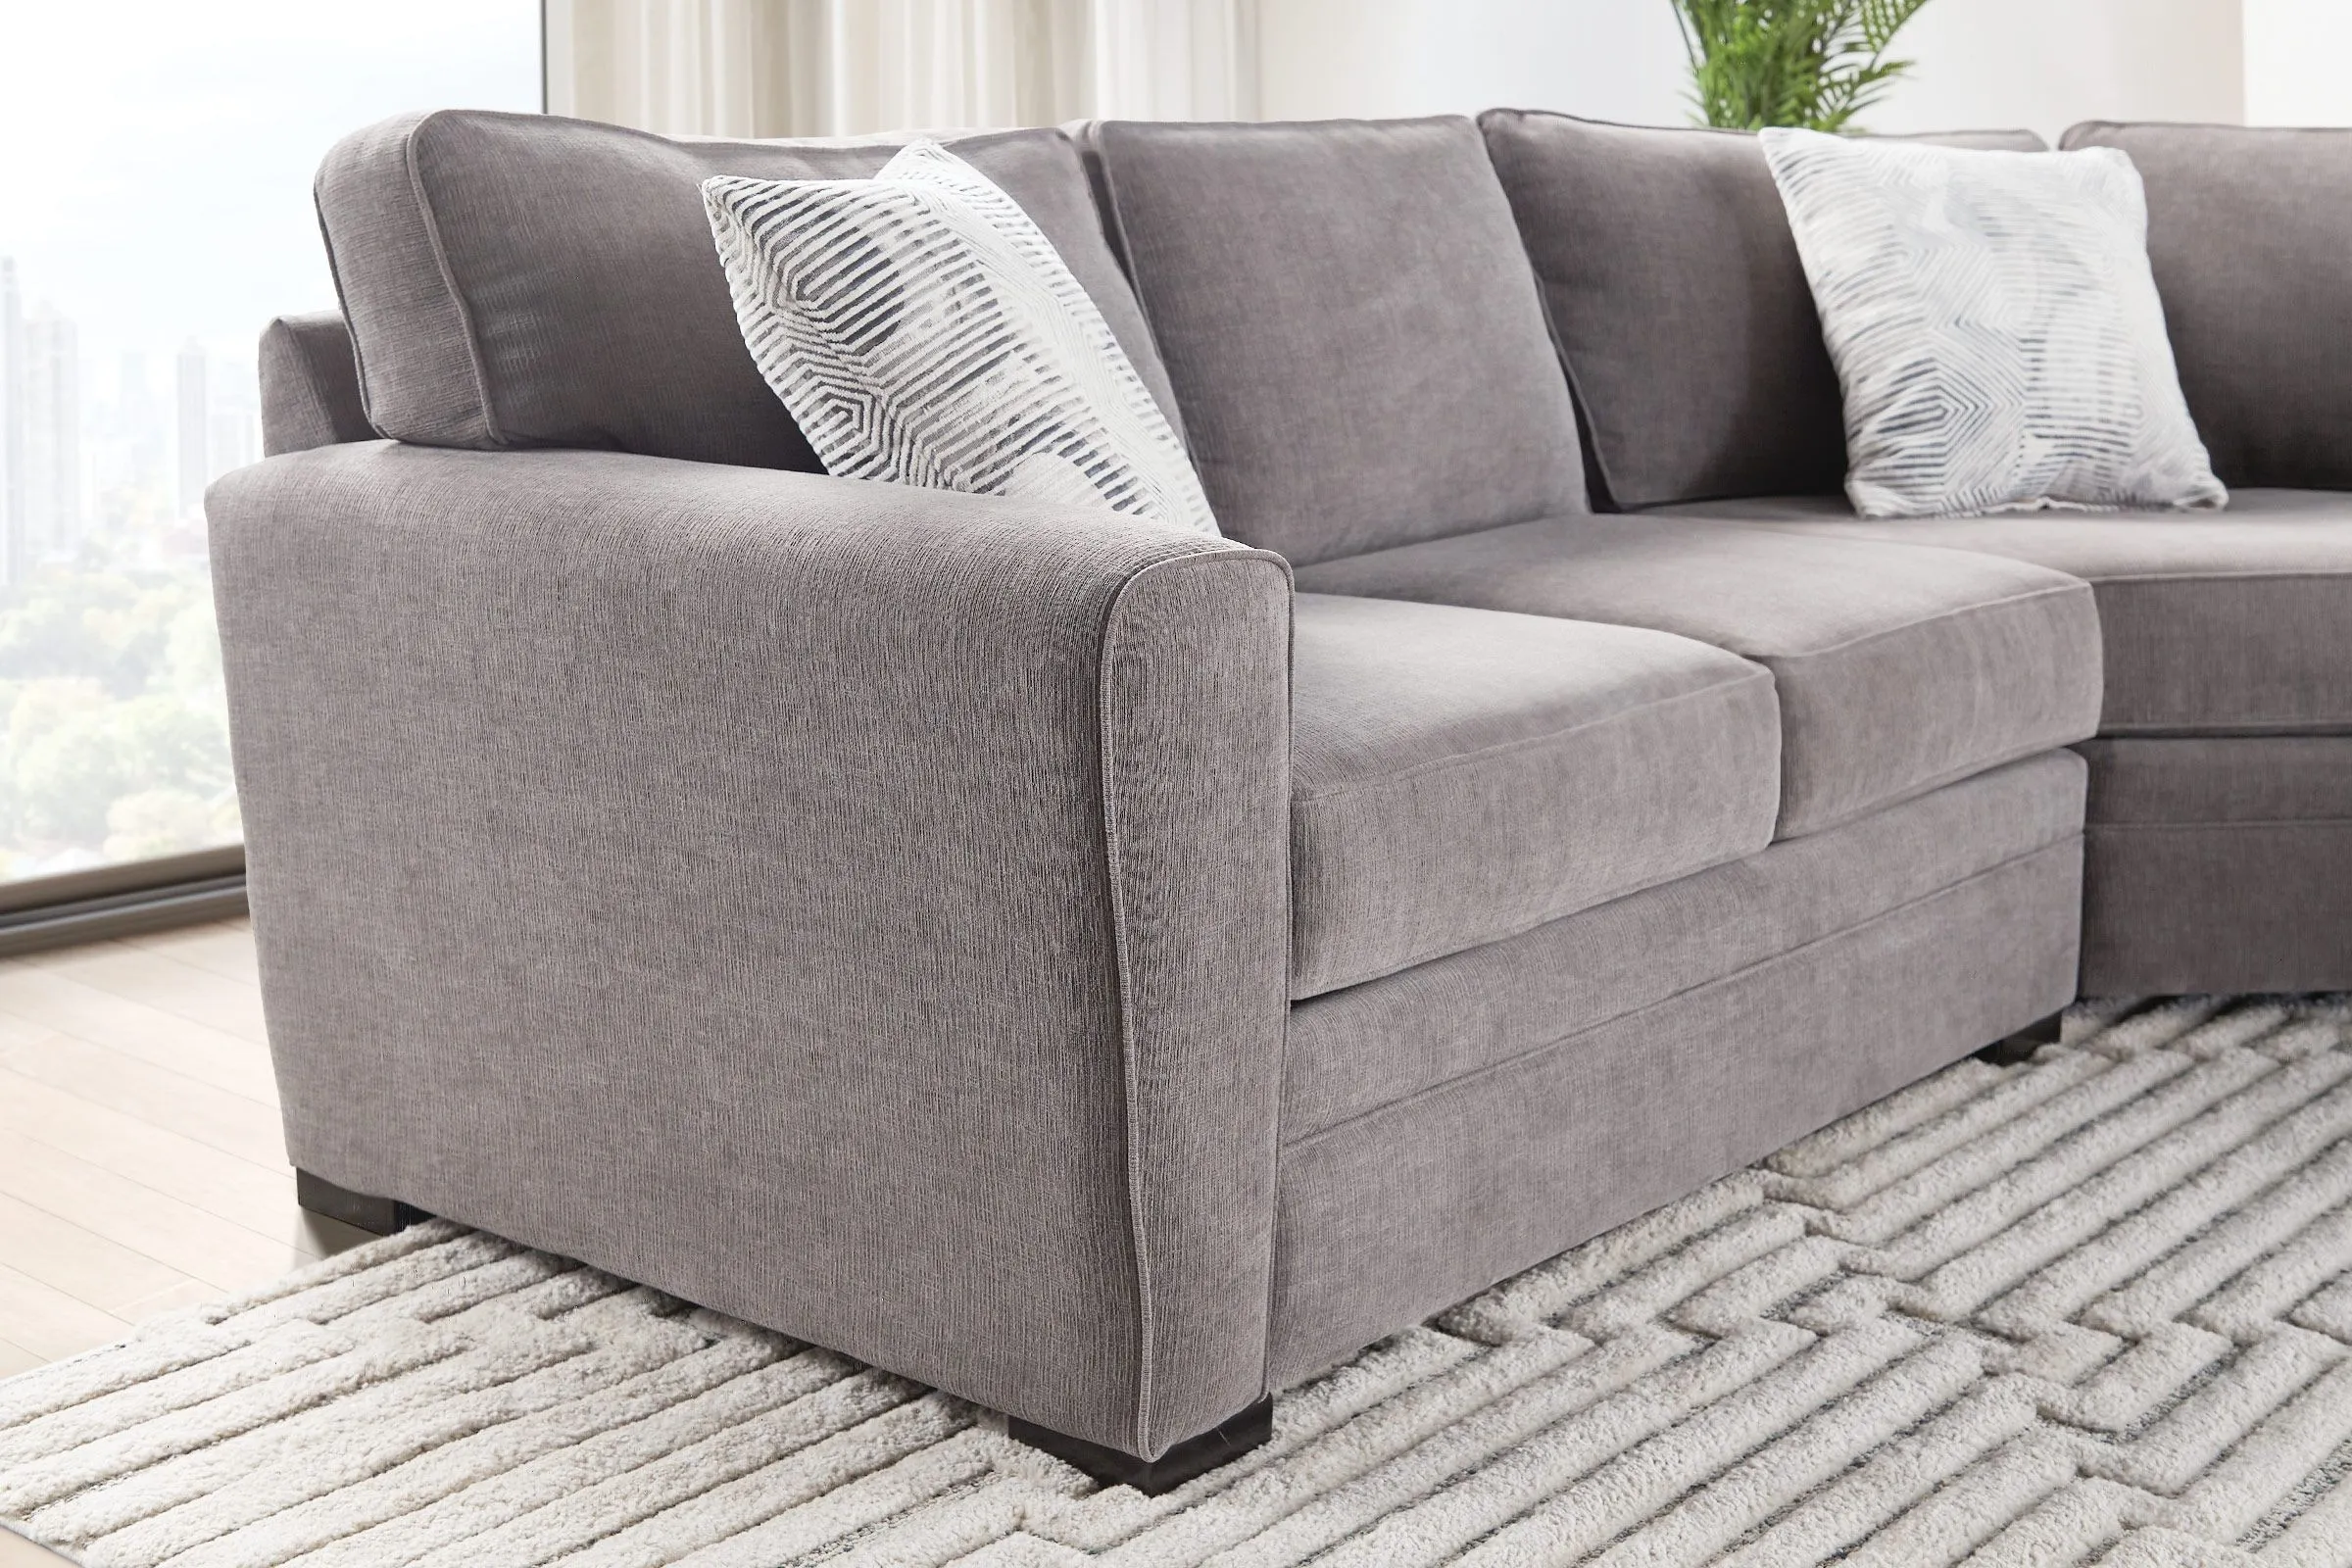 Zephyr 3-Piece Corner Sectional by Jonathan Louis